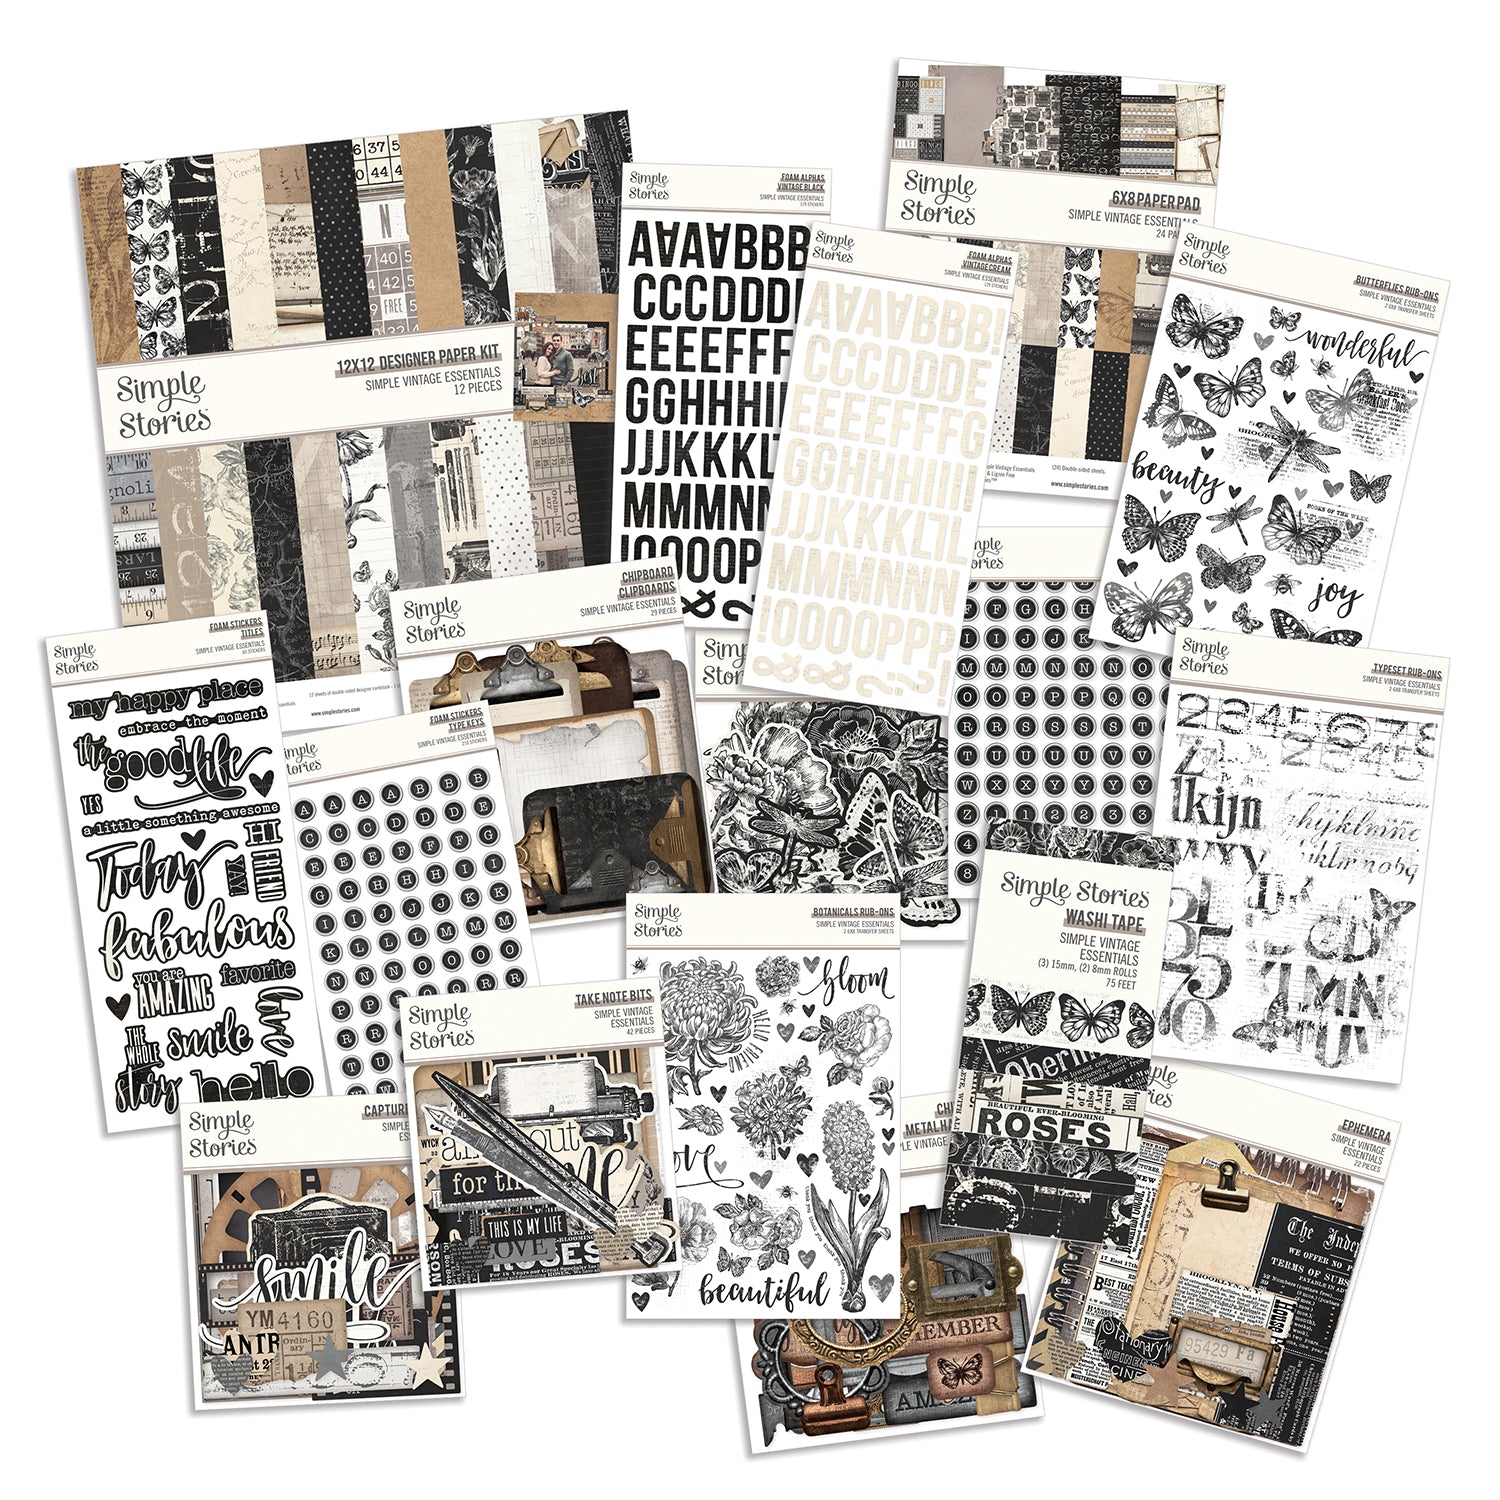 Simple Vintage Essentials Sticker Book – Layle By Mail